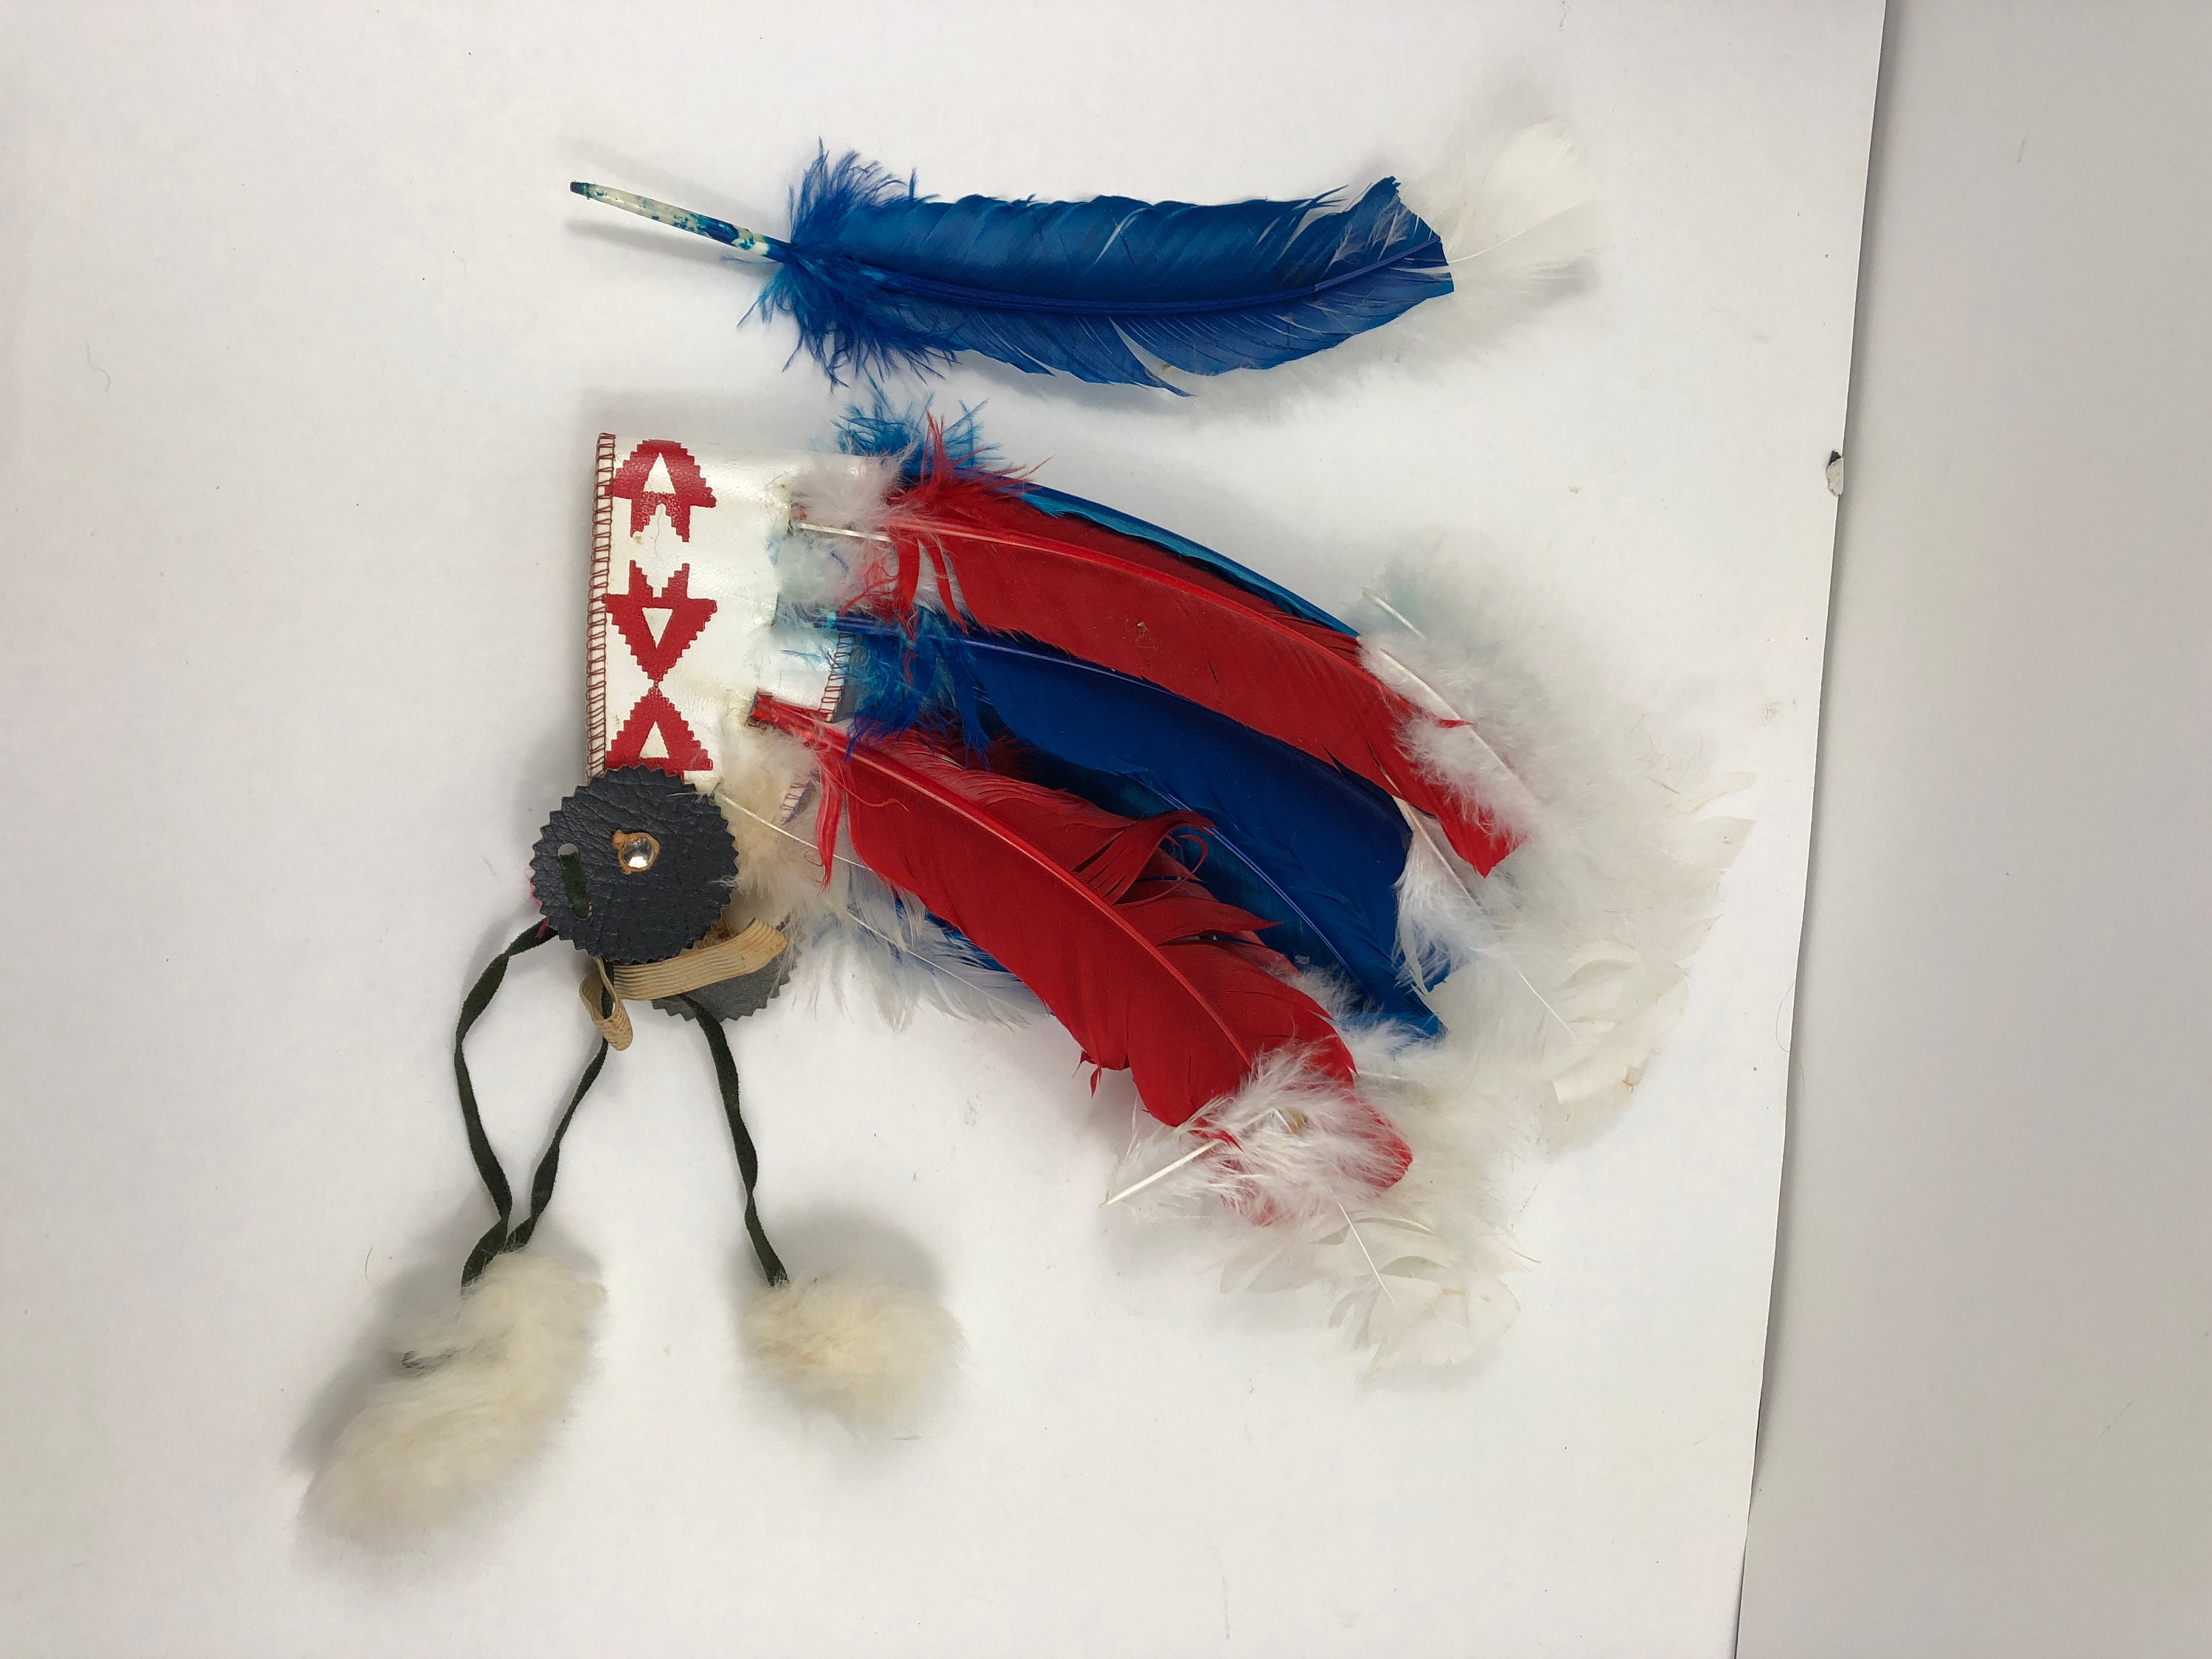 Native American Headdress w fake feathers NOS vintage 1960s dime store kids toy 